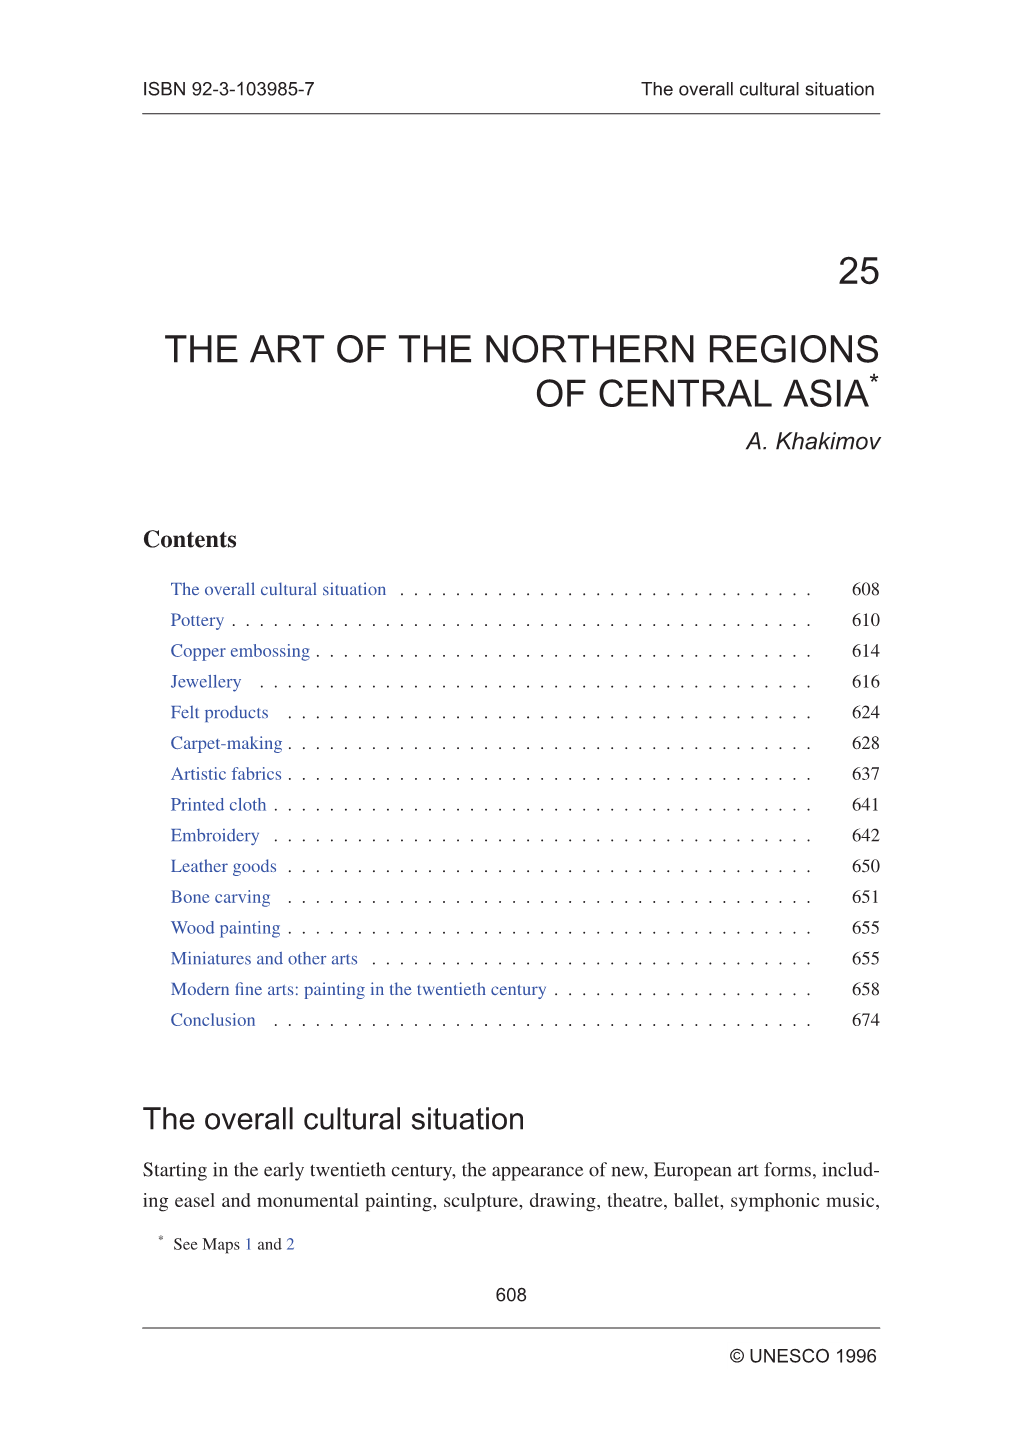 25 the Art of the Northern Regions of Central Asia